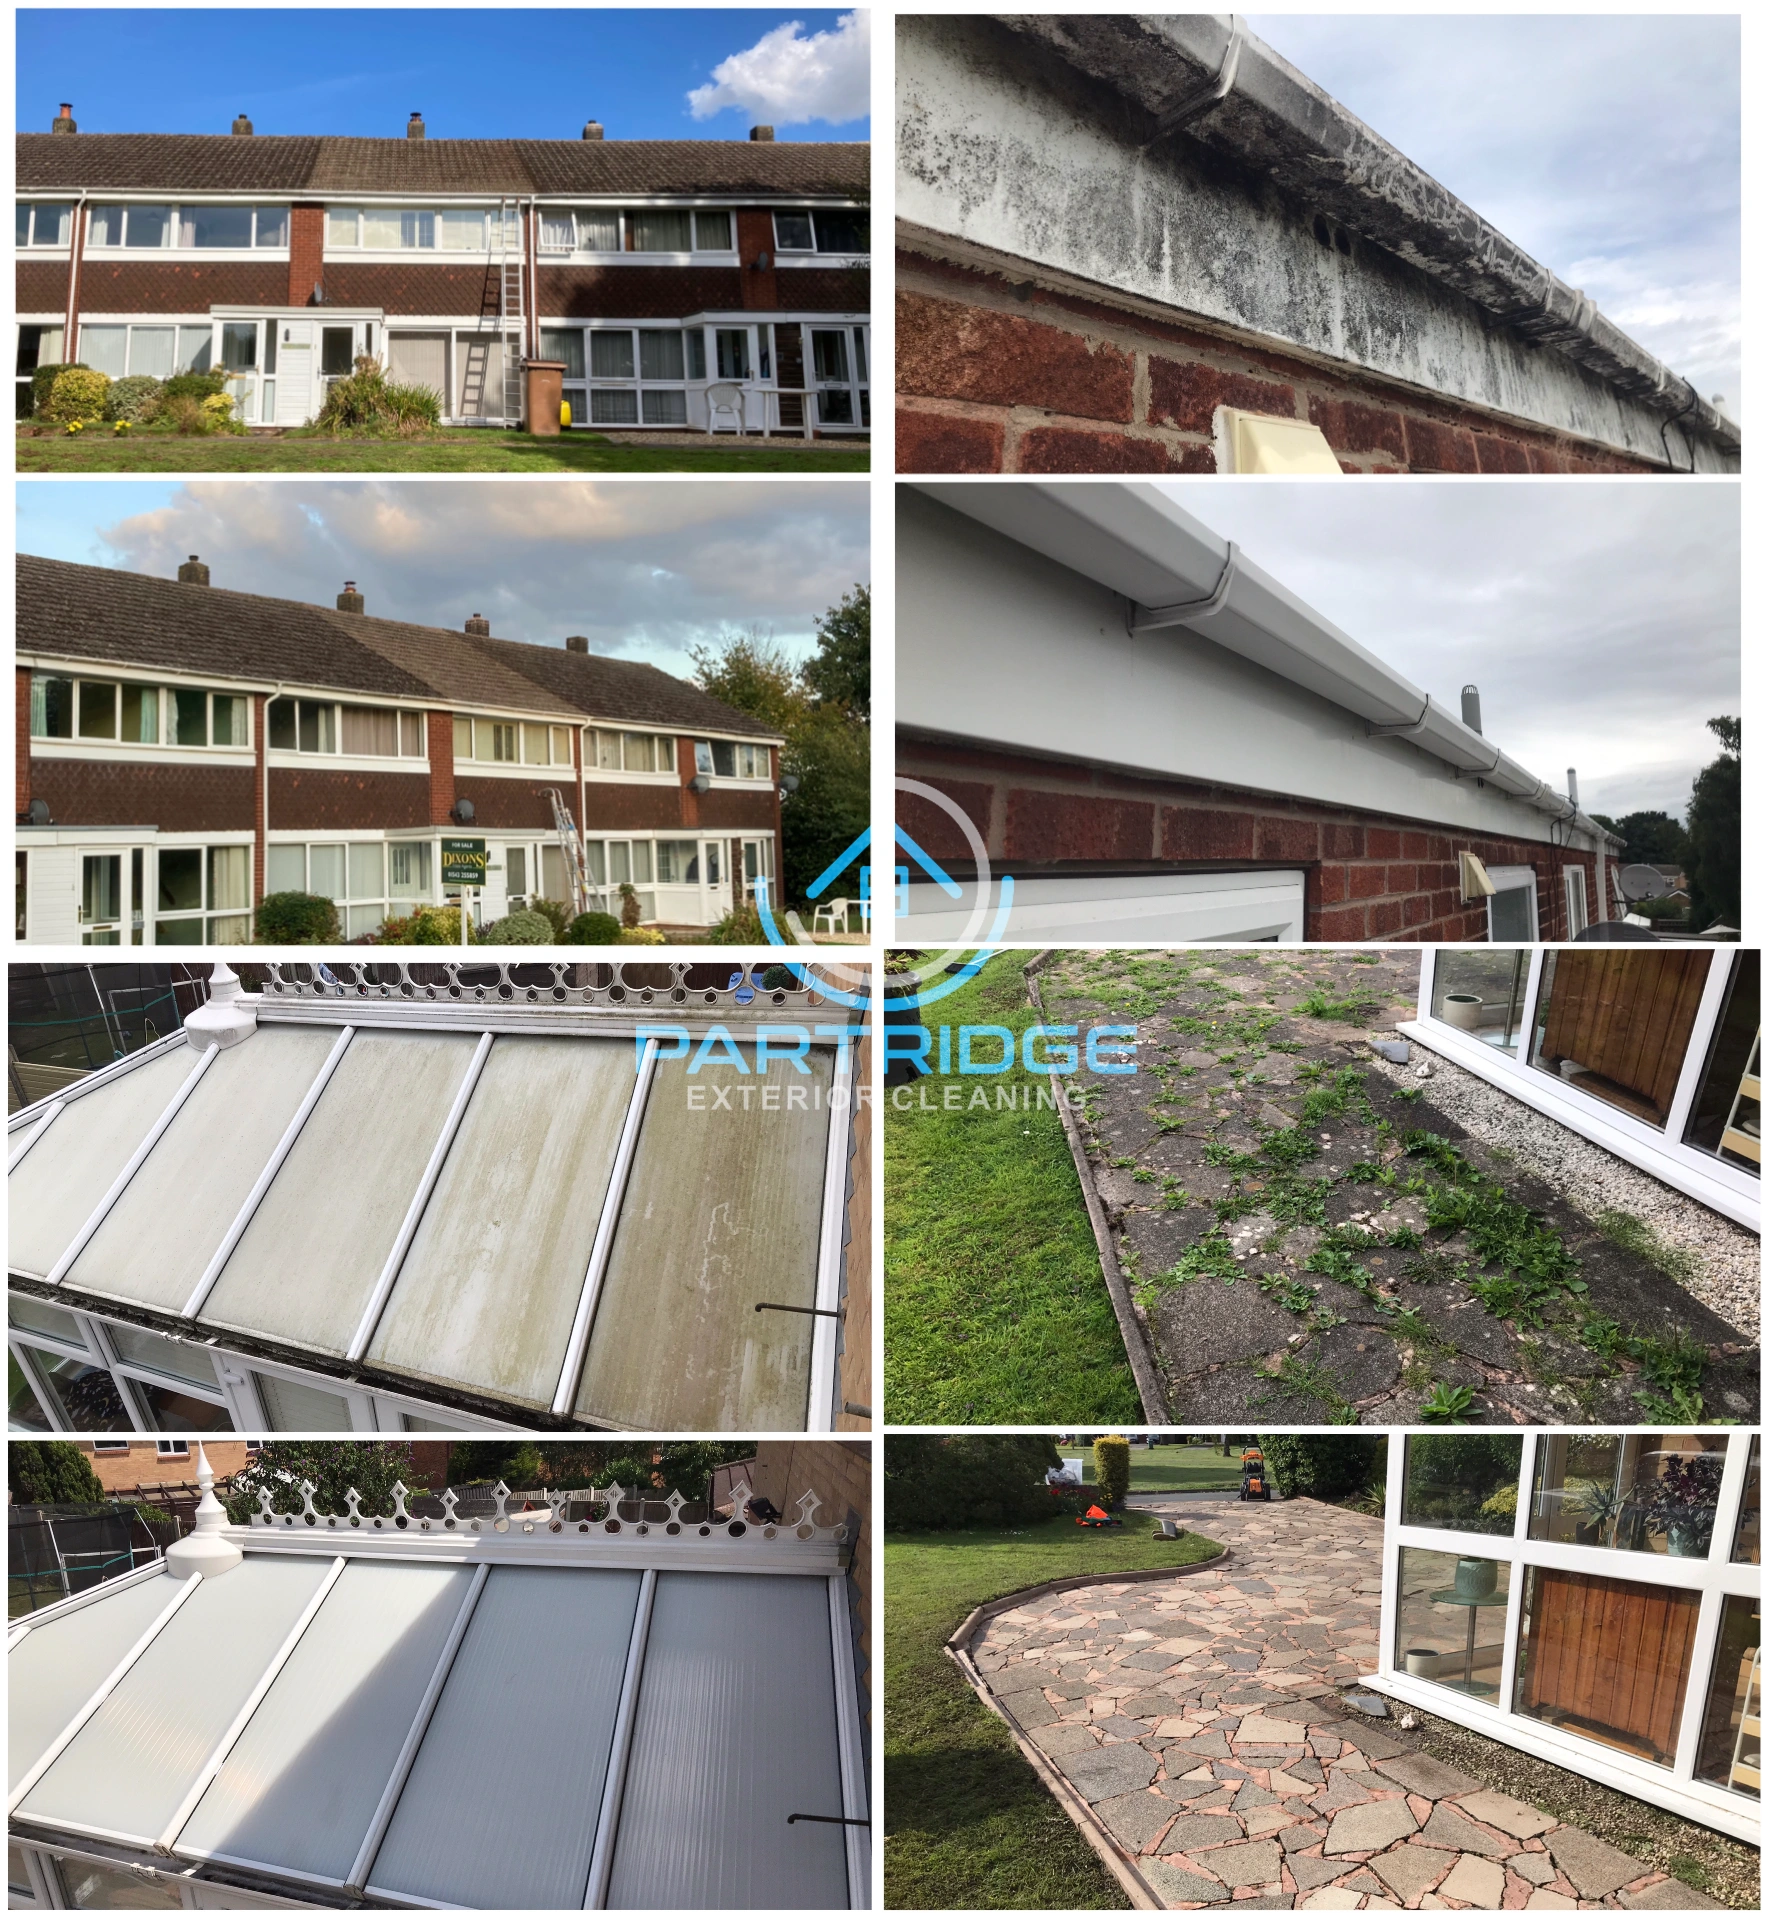 Photos show before and after of roof, gutter and driveway cleaning in the Midlands.